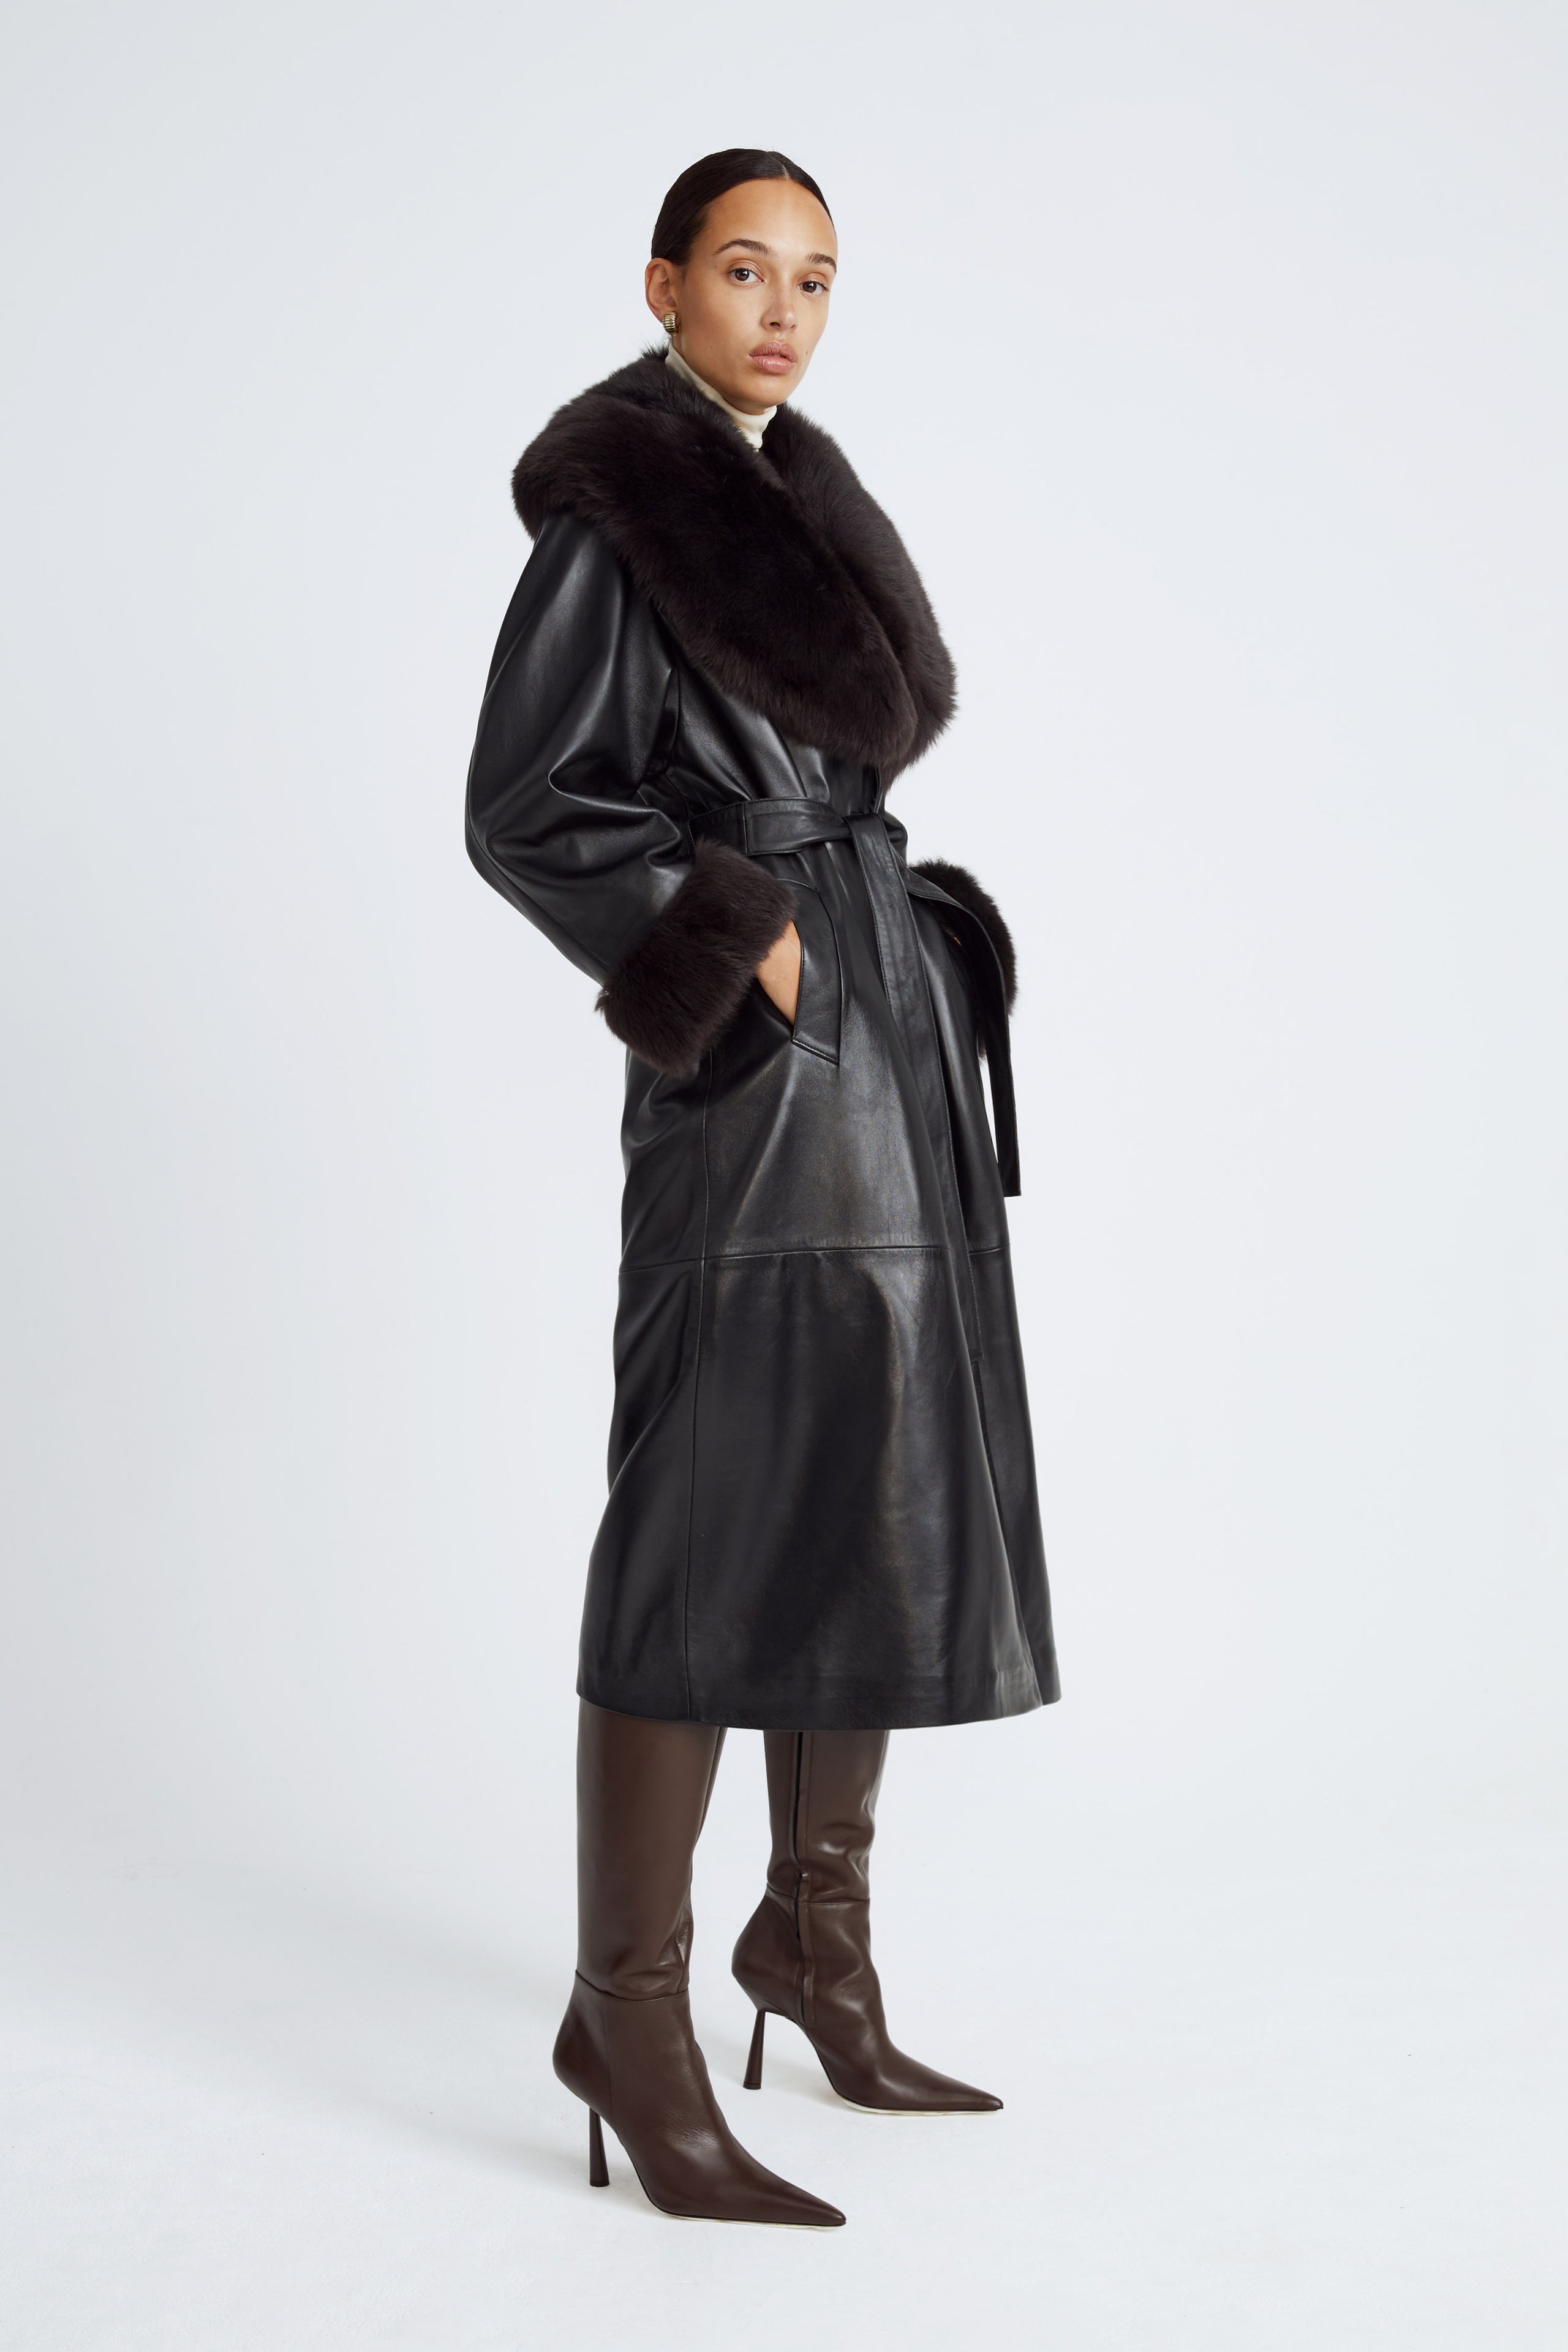 Model is wearing the Freja Black Espresso Luxurious Leather Trench Side